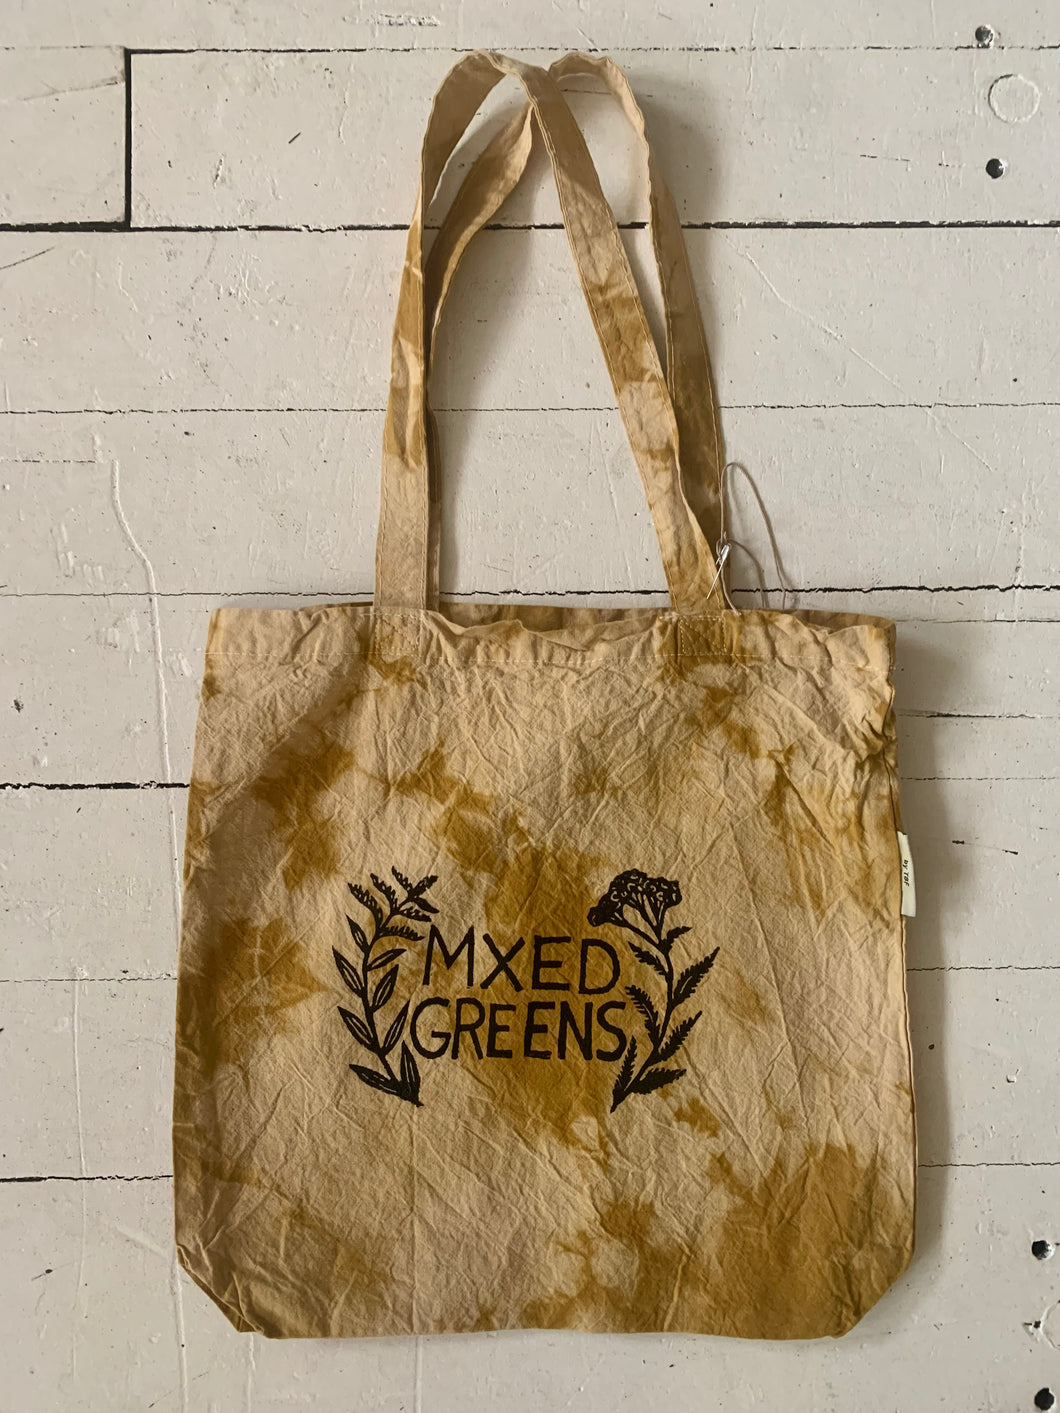 MXED GREENS tote bags